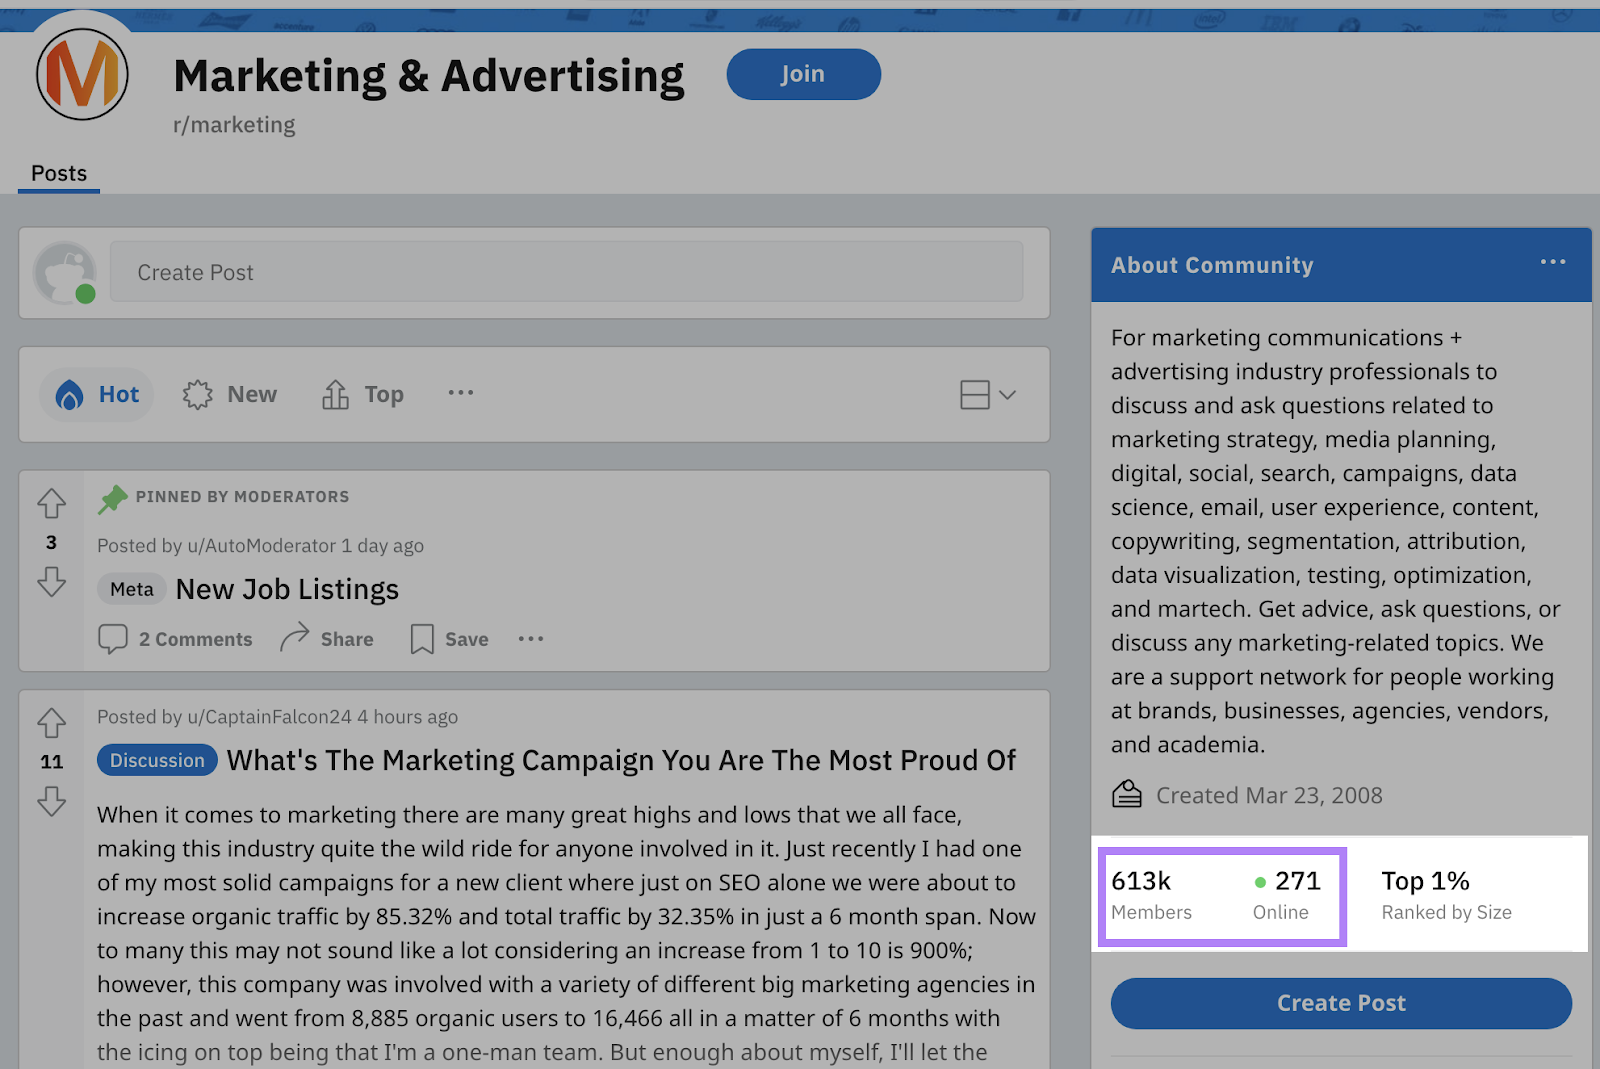 Number of users (613k) and online (271) metric highlighted in "Marketing & Advertising" subreddit sidebar